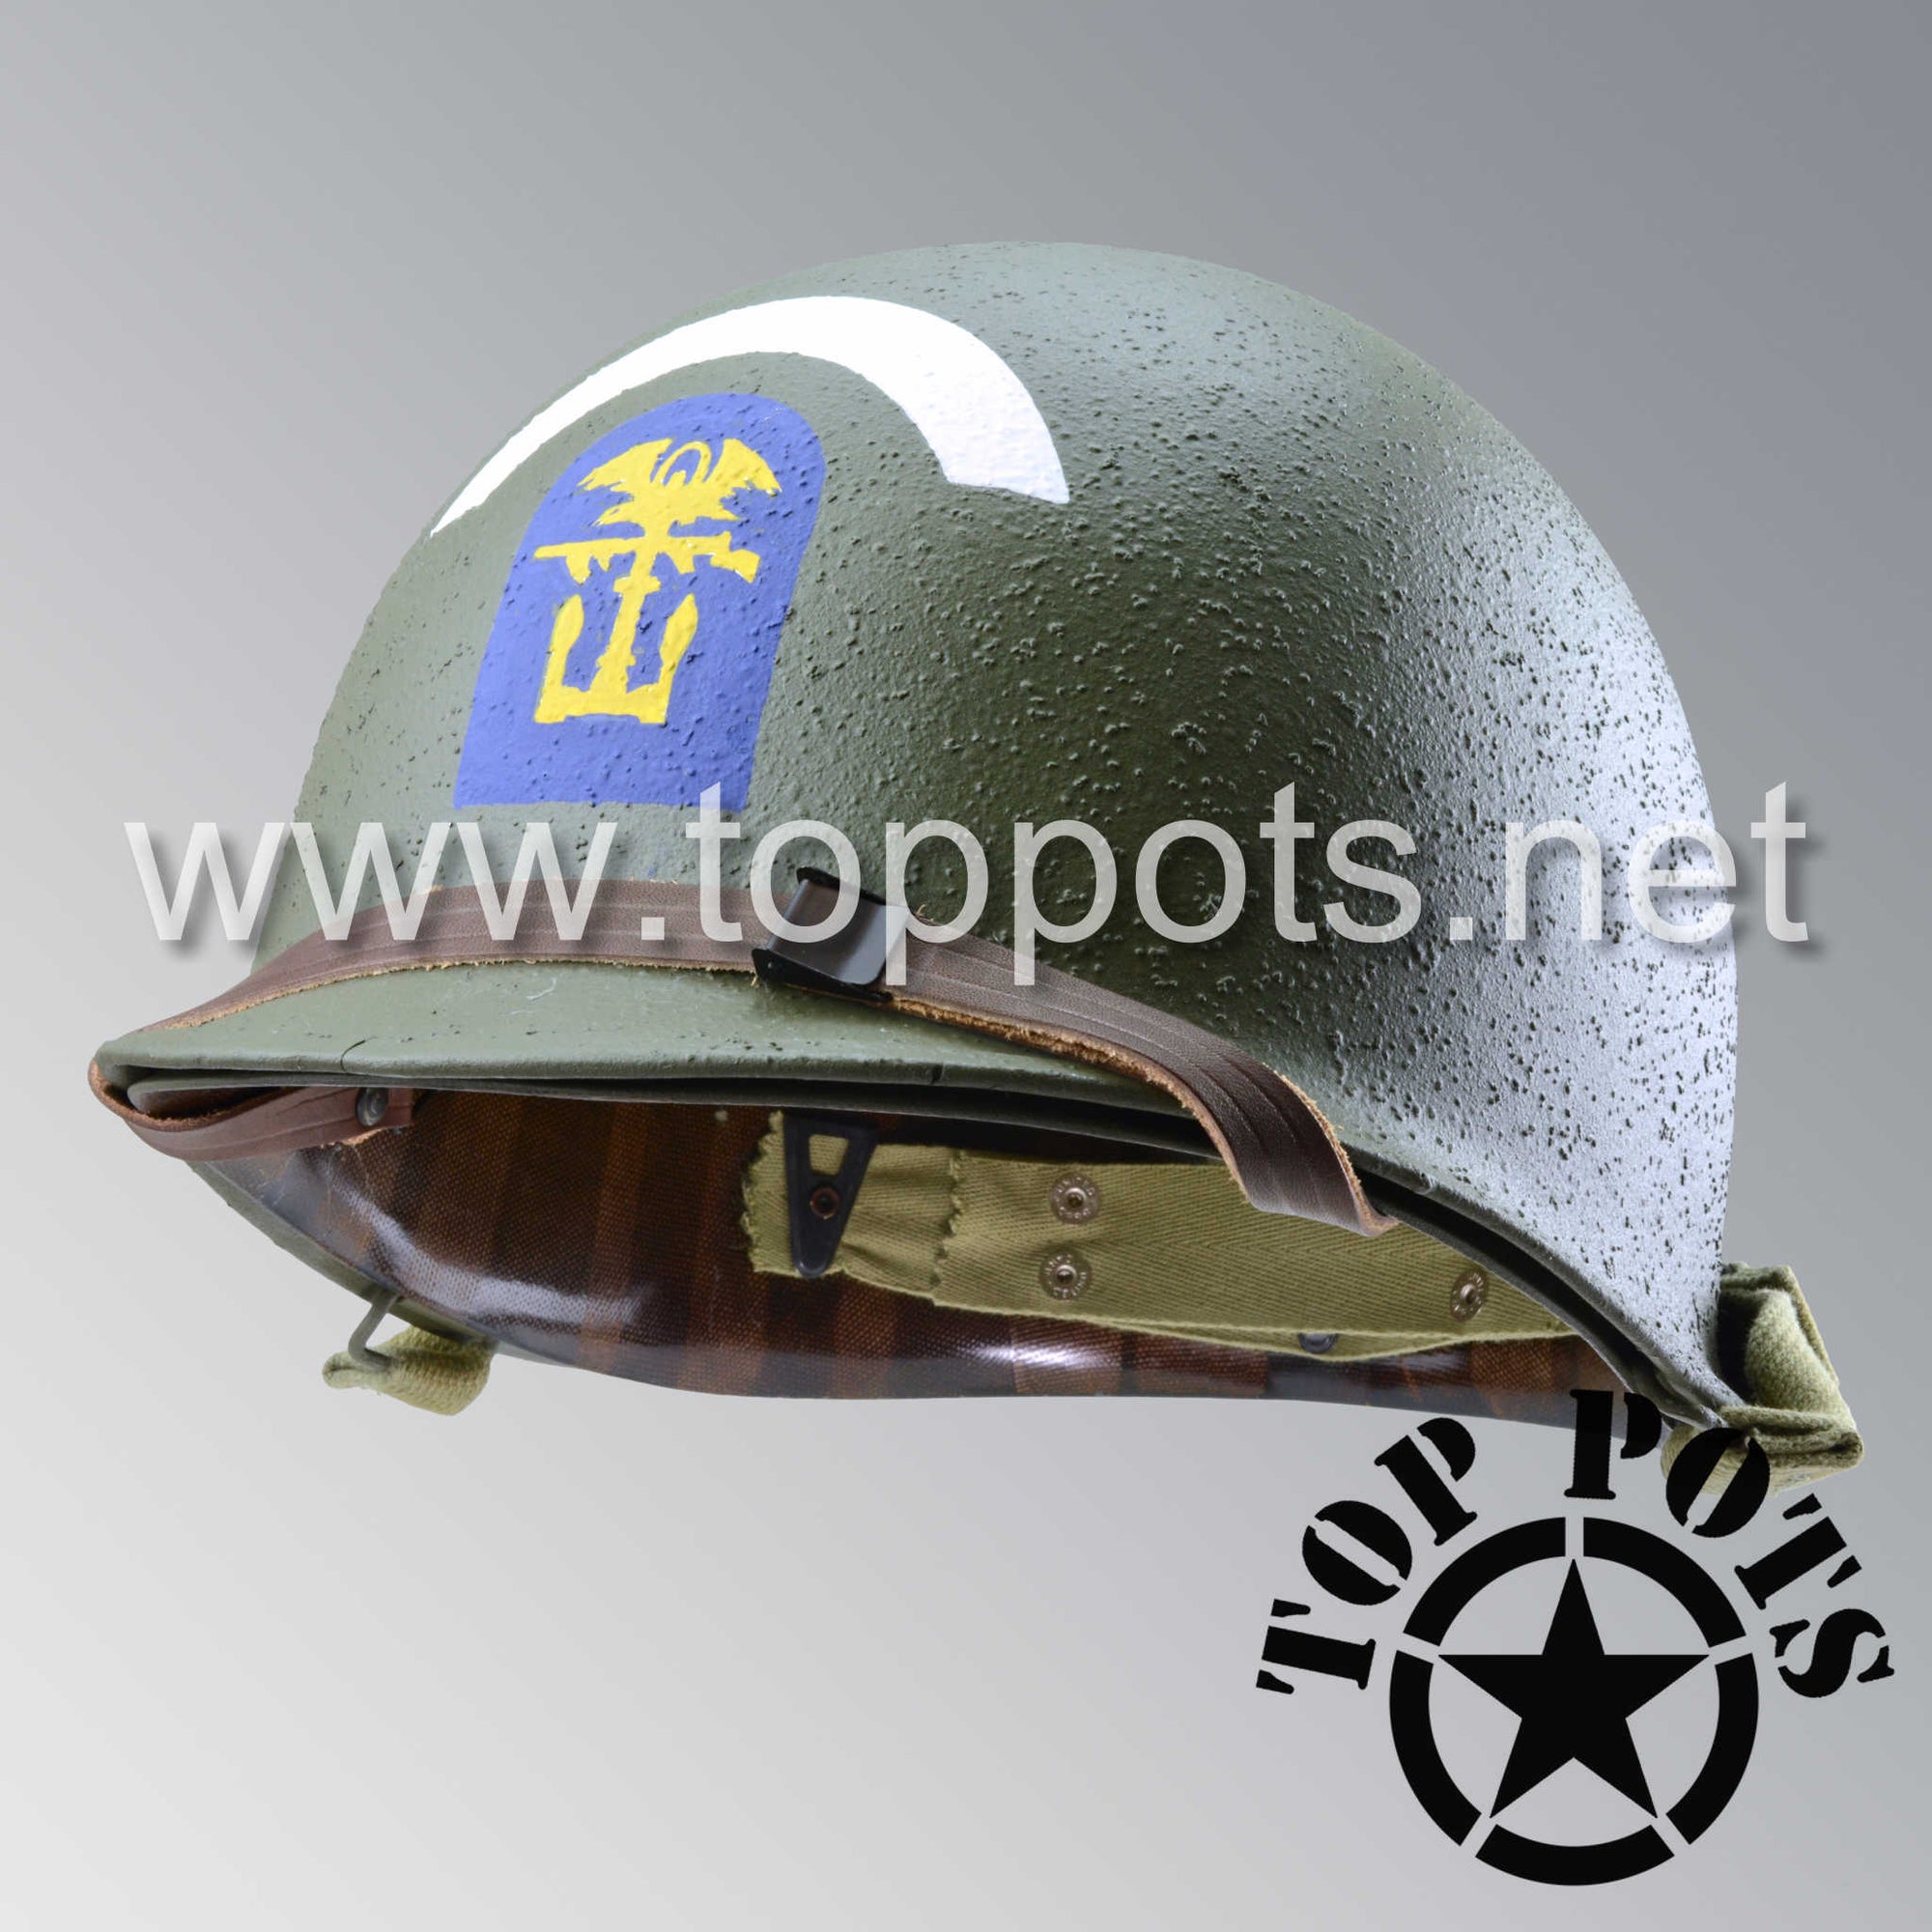 WWII US Army Restored Original M1 Infantry Helmet Swivel Bale Shell and Liner with ESB Engineer Special Brigade Emblem